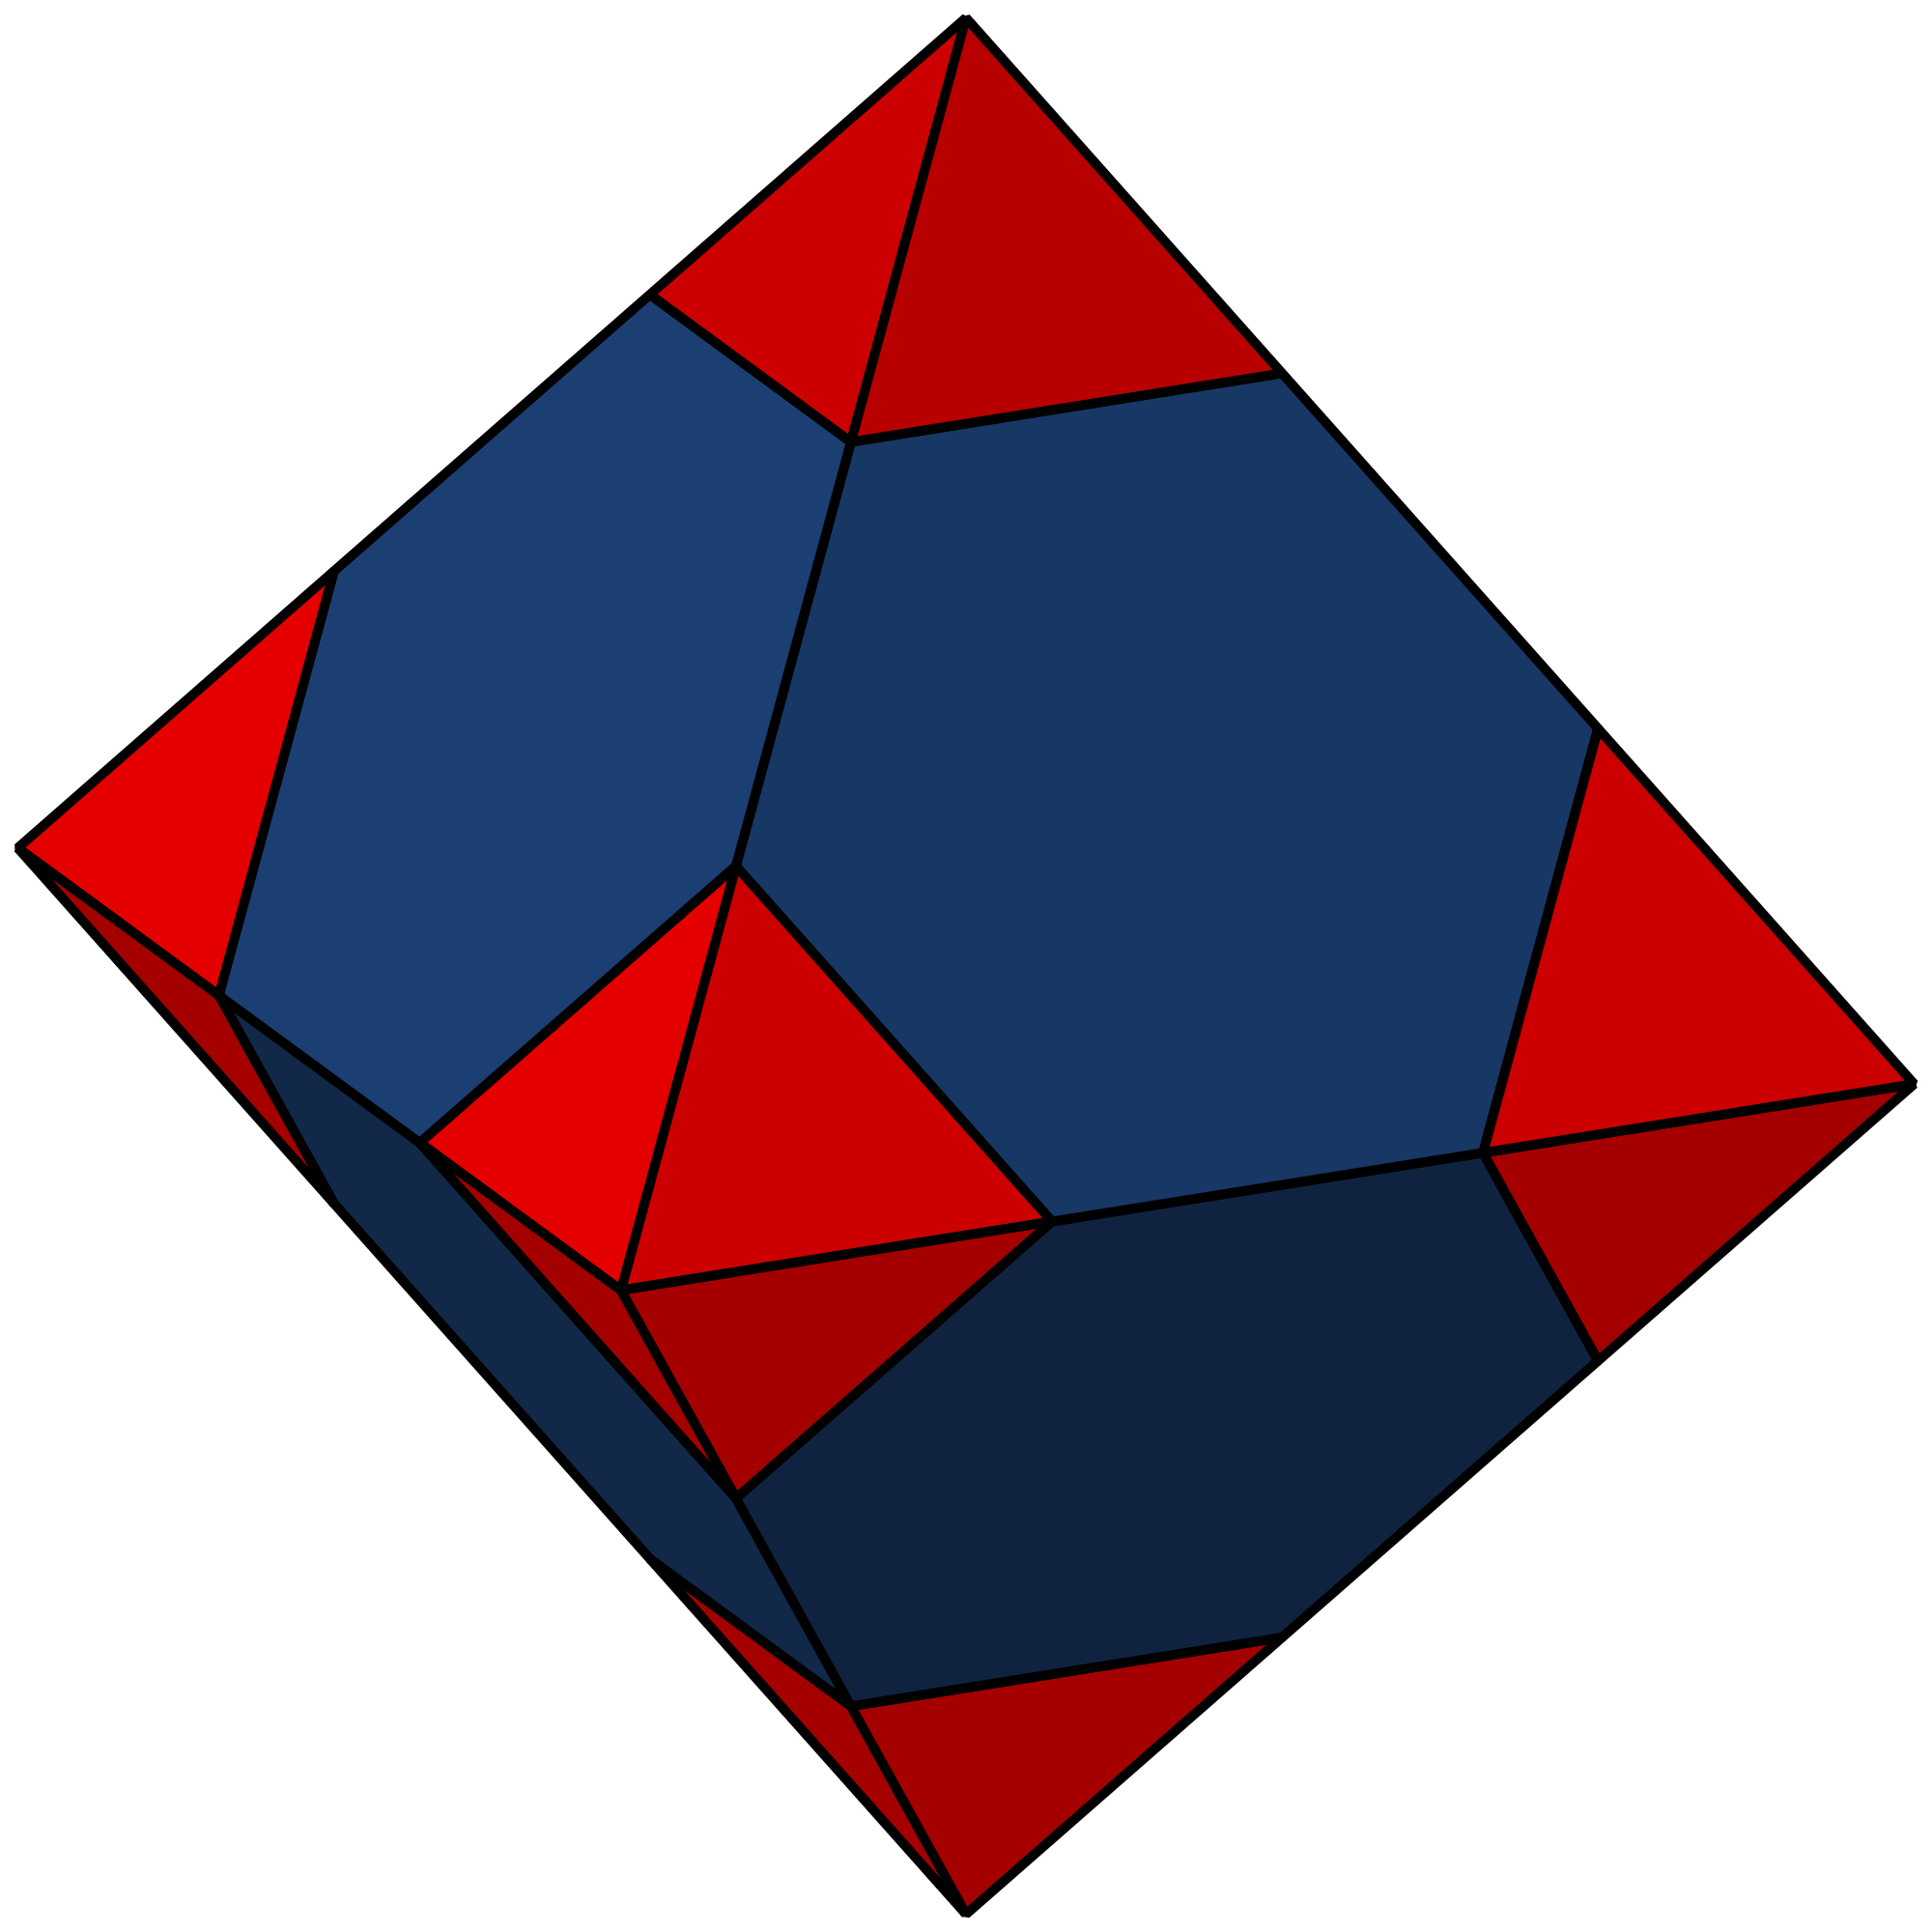 File:Truncated Octahedron with Construction.svg - Wikimedia Commons